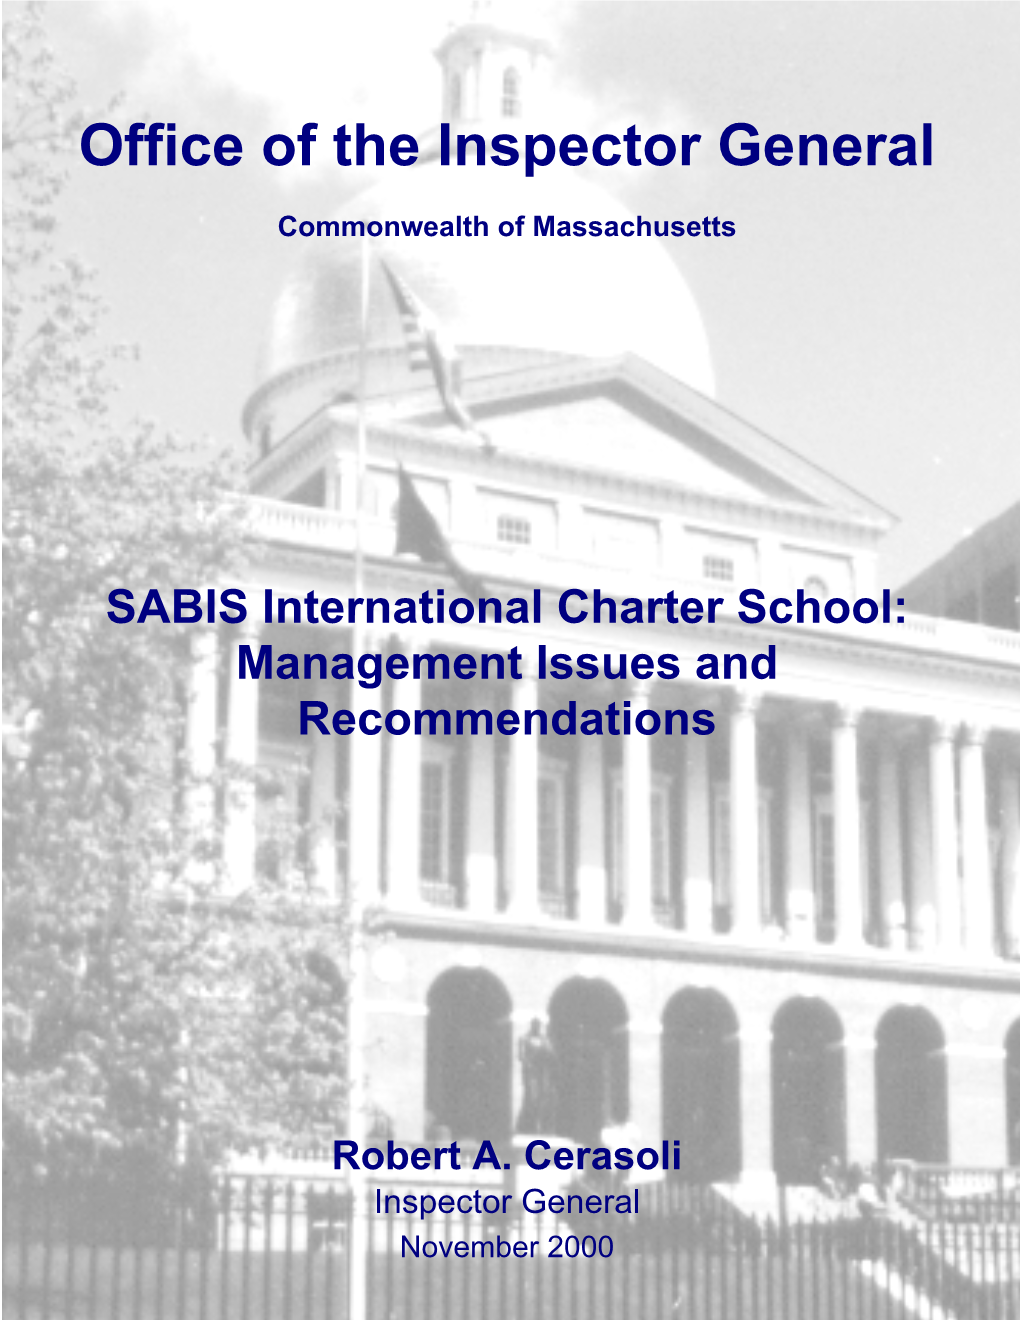 SABIS International Charter School: Management Issues and Recommendations